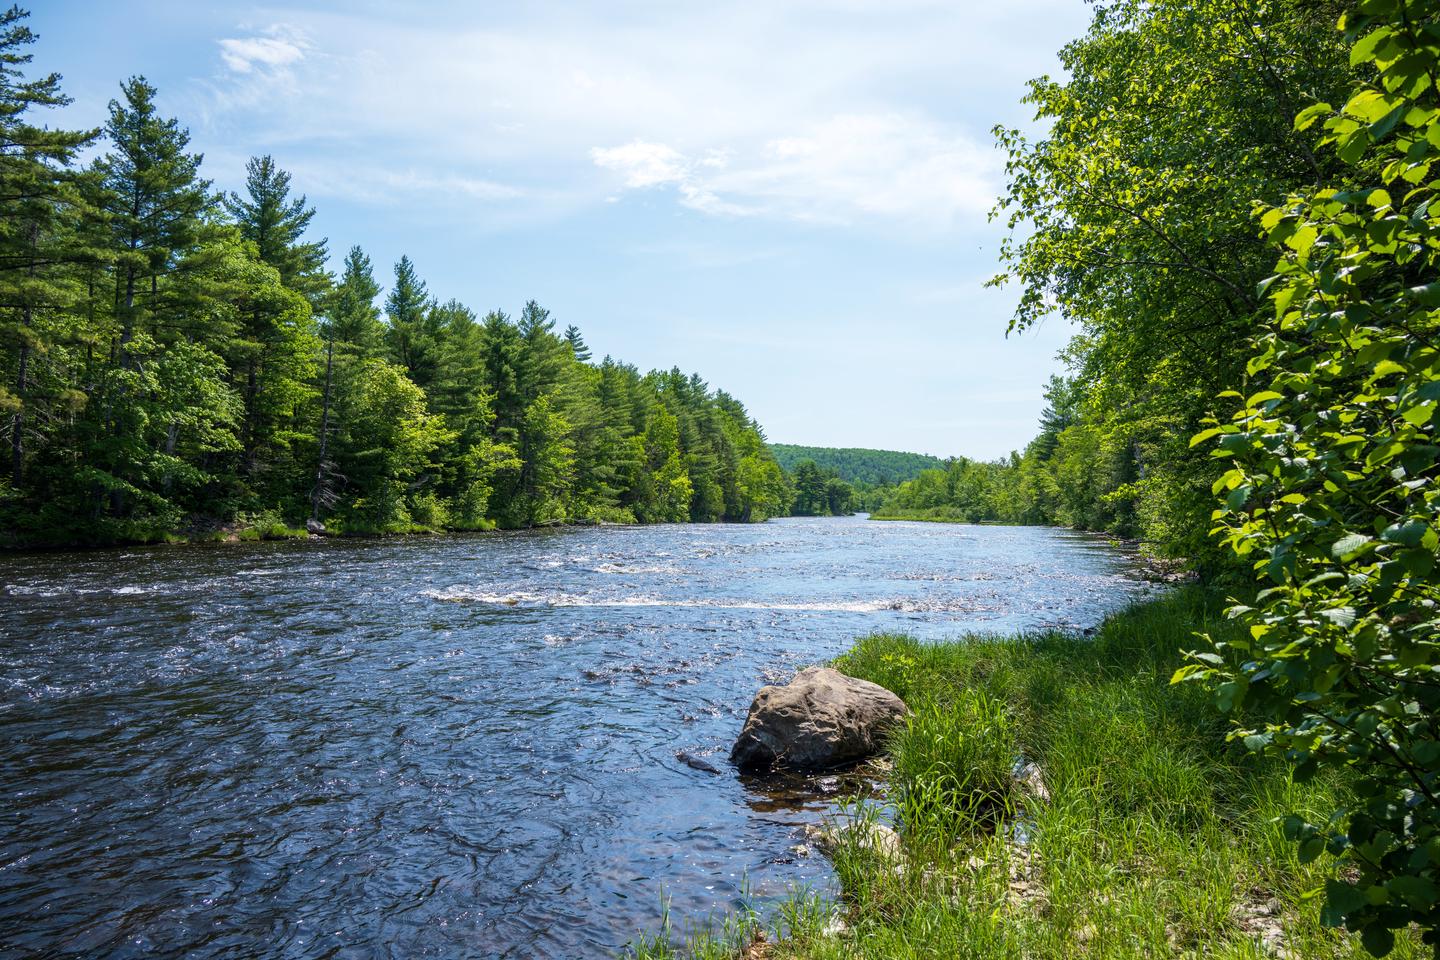 A view of the East Branch of the Penobscot River. A wide river on a sunny, blue-sky day. Lush green forest borders both sides of the river. The grass is tall on the rocky shoreline.The East Branch of the Penobscot River.